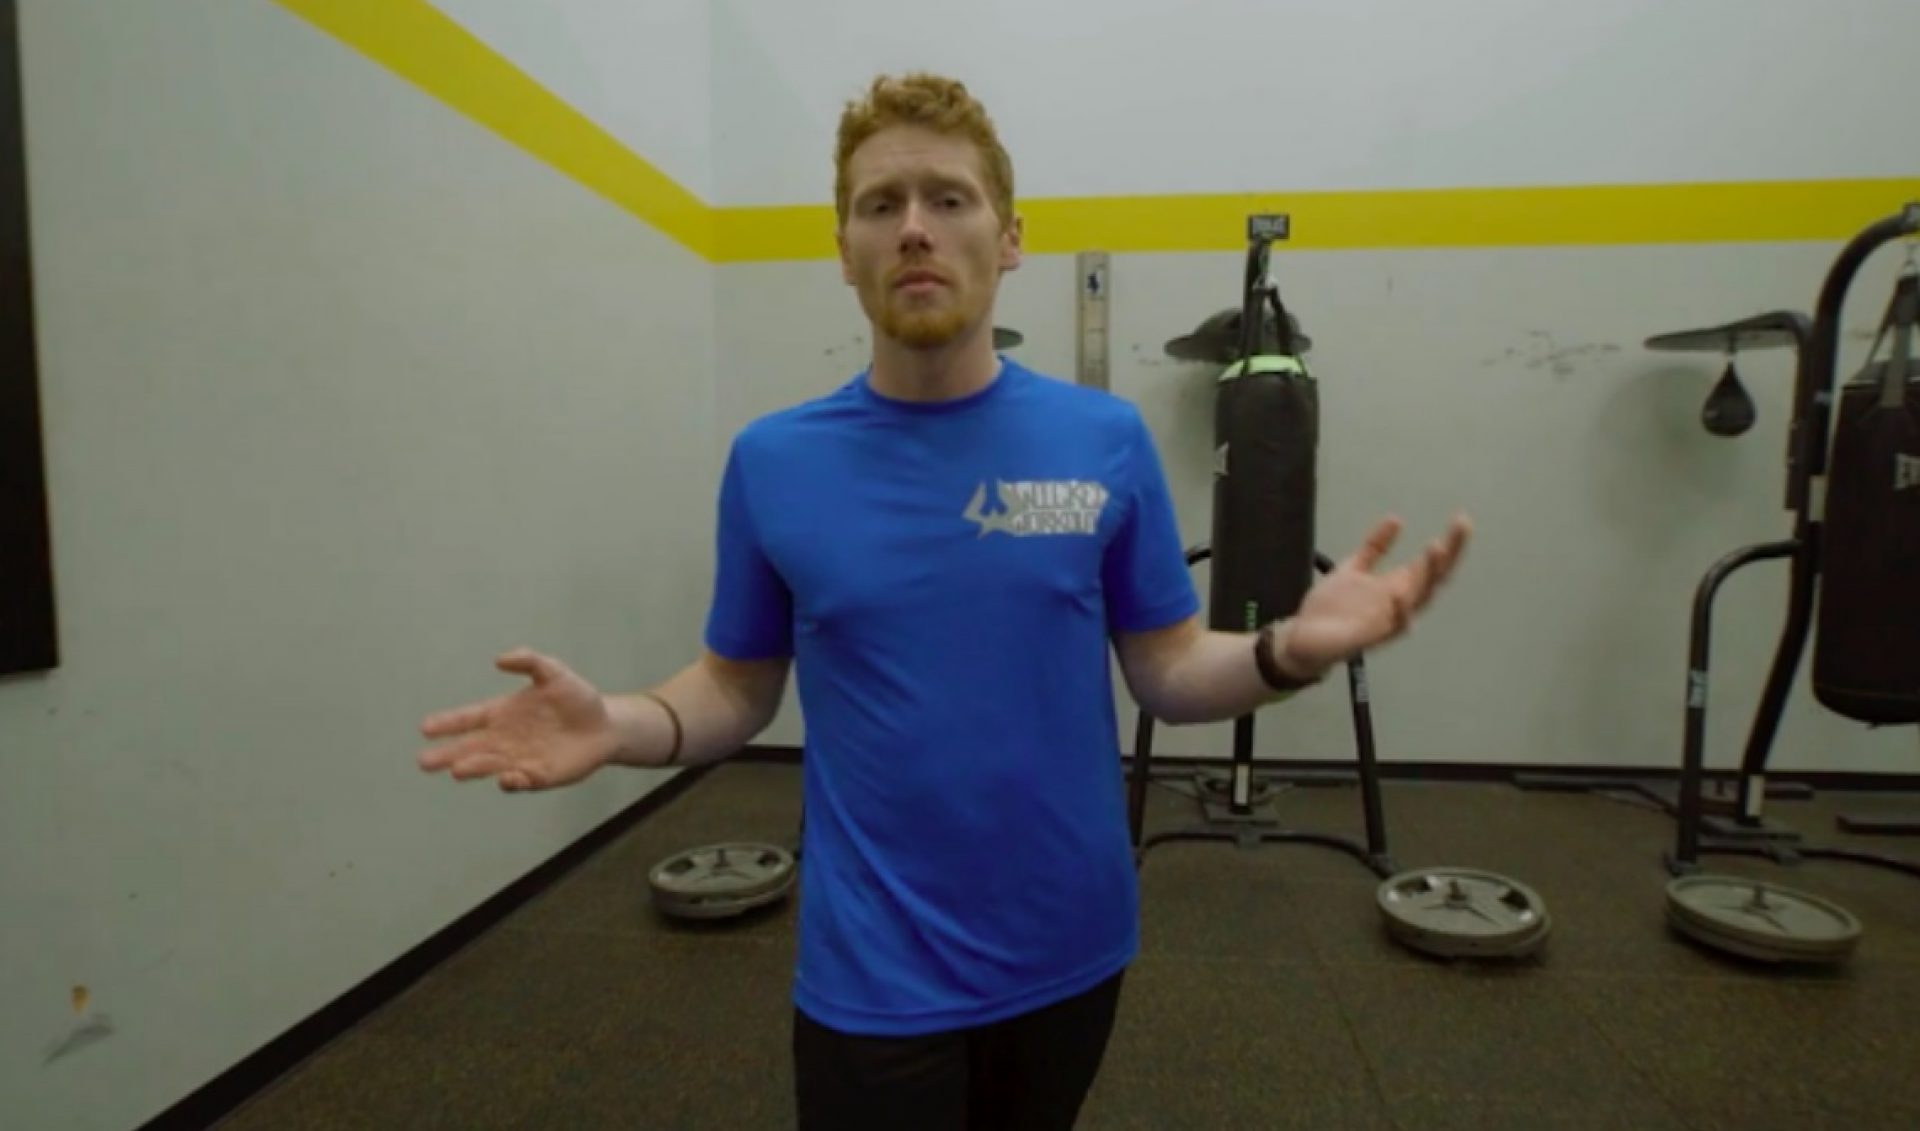 Fund This: A Boston-Area Comedian Is Gonna Make You Sweat With A ‘Wicked Workout’